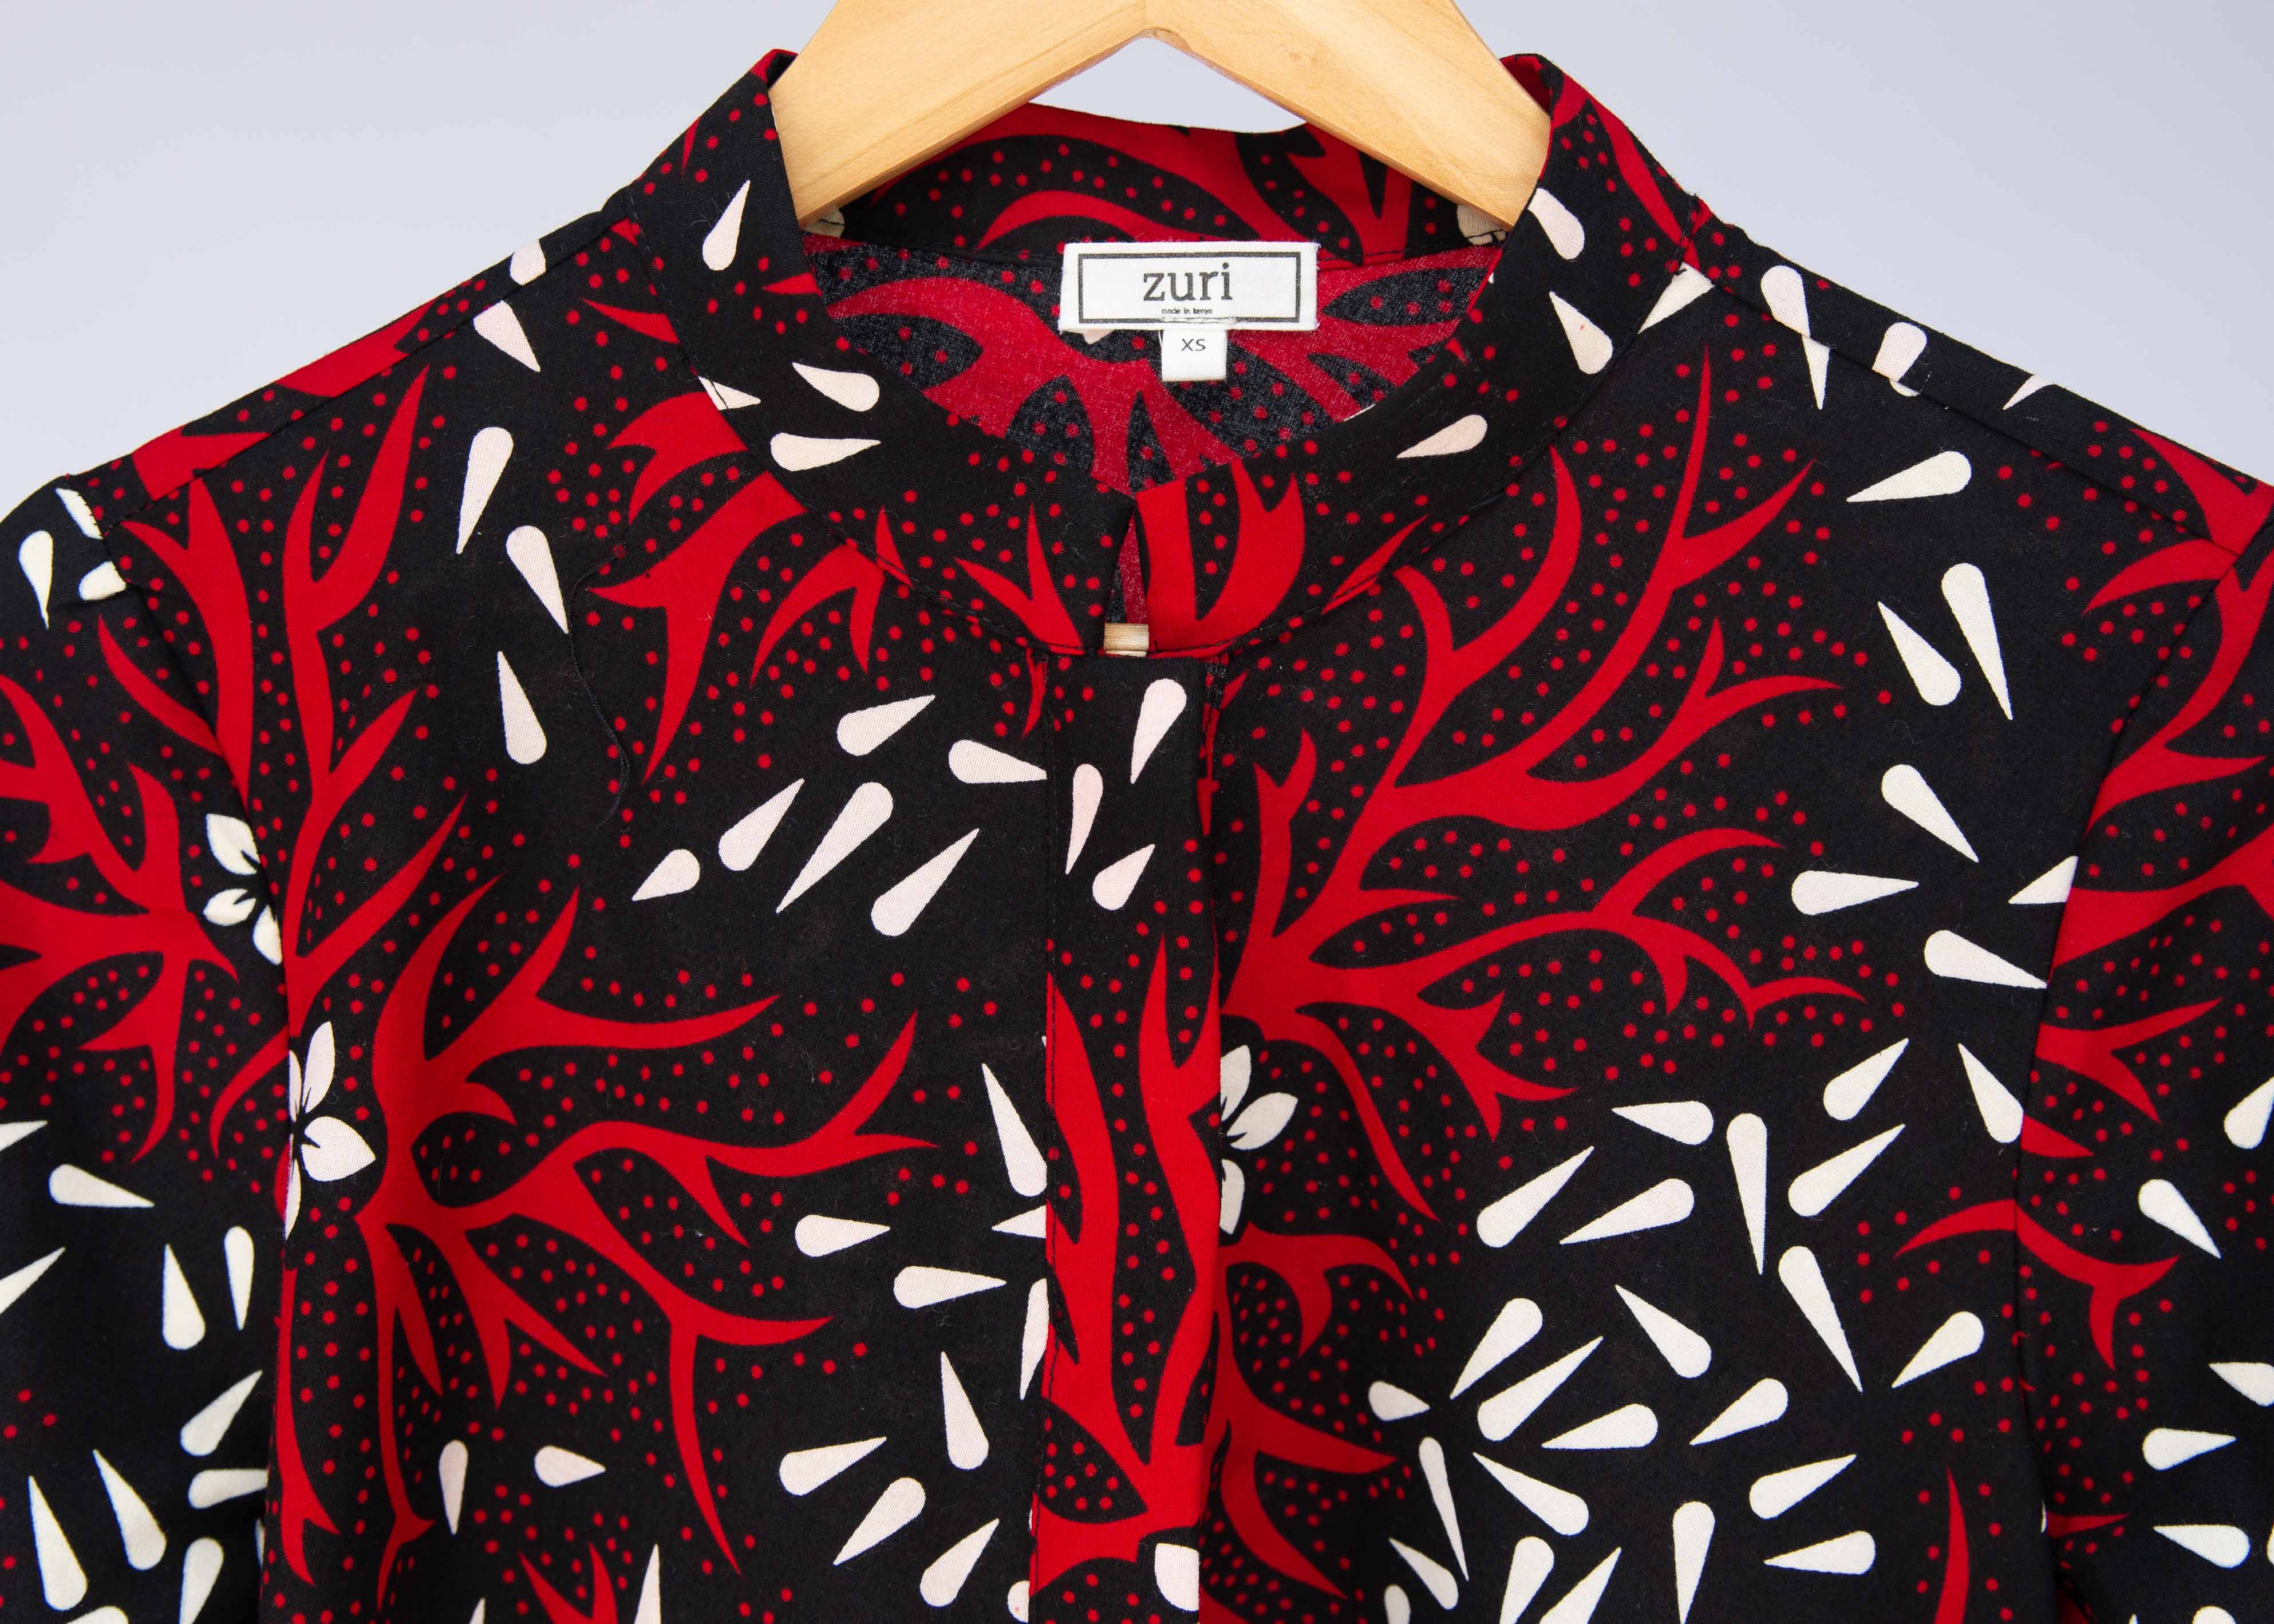 Close up display of red, white, and black floral print dress.